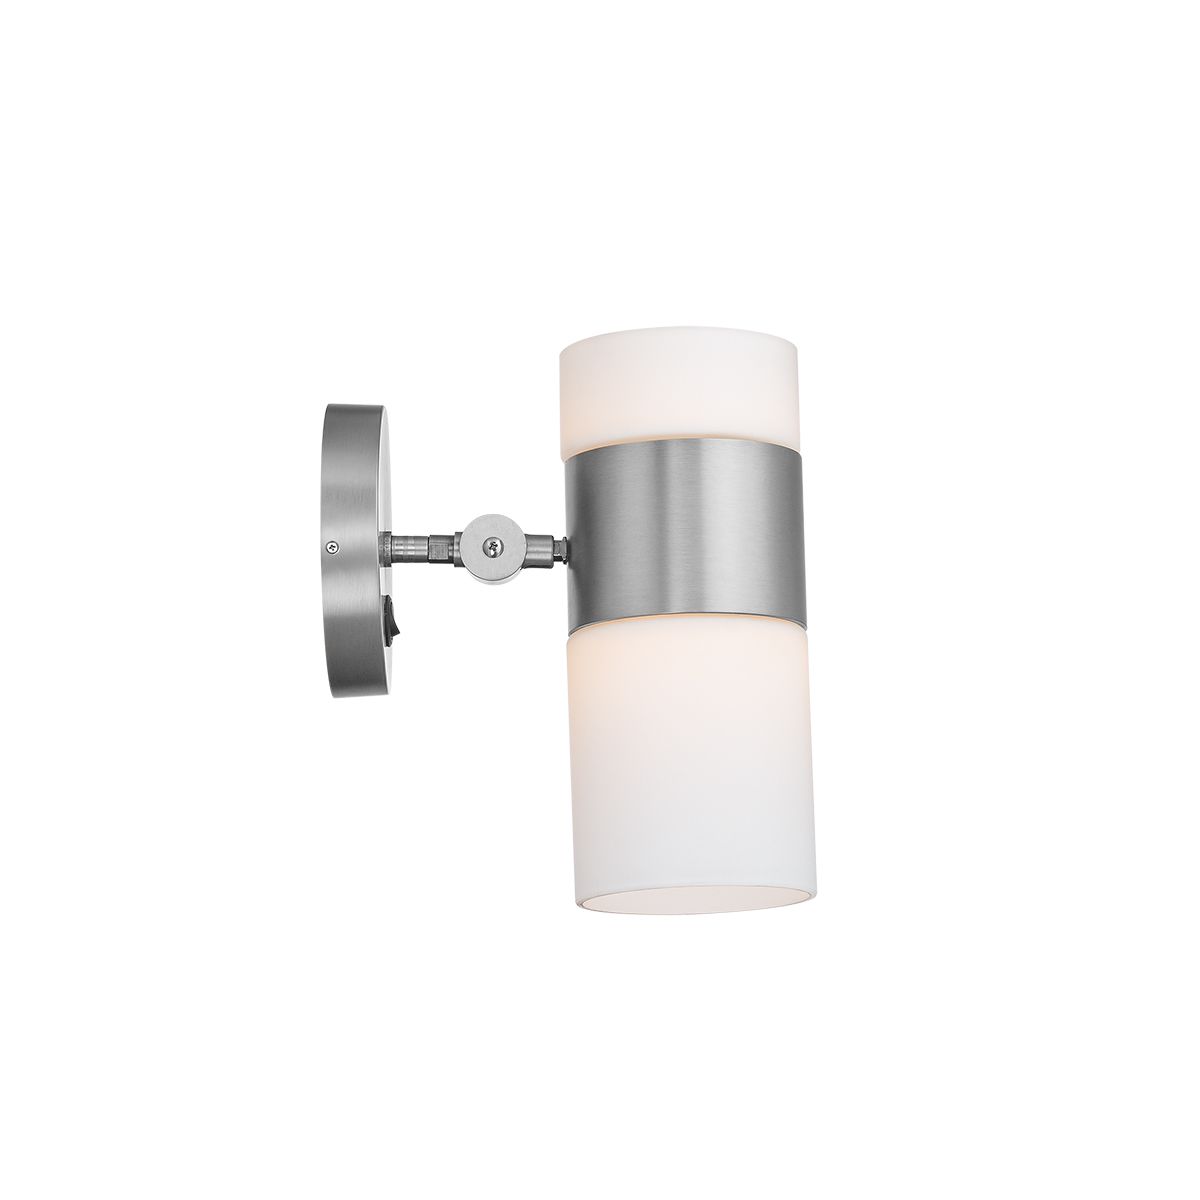 Pencil Skirt 10 in. LED Swing Arm Wall Sconce 367 Lumens 3000K Nickel Finish